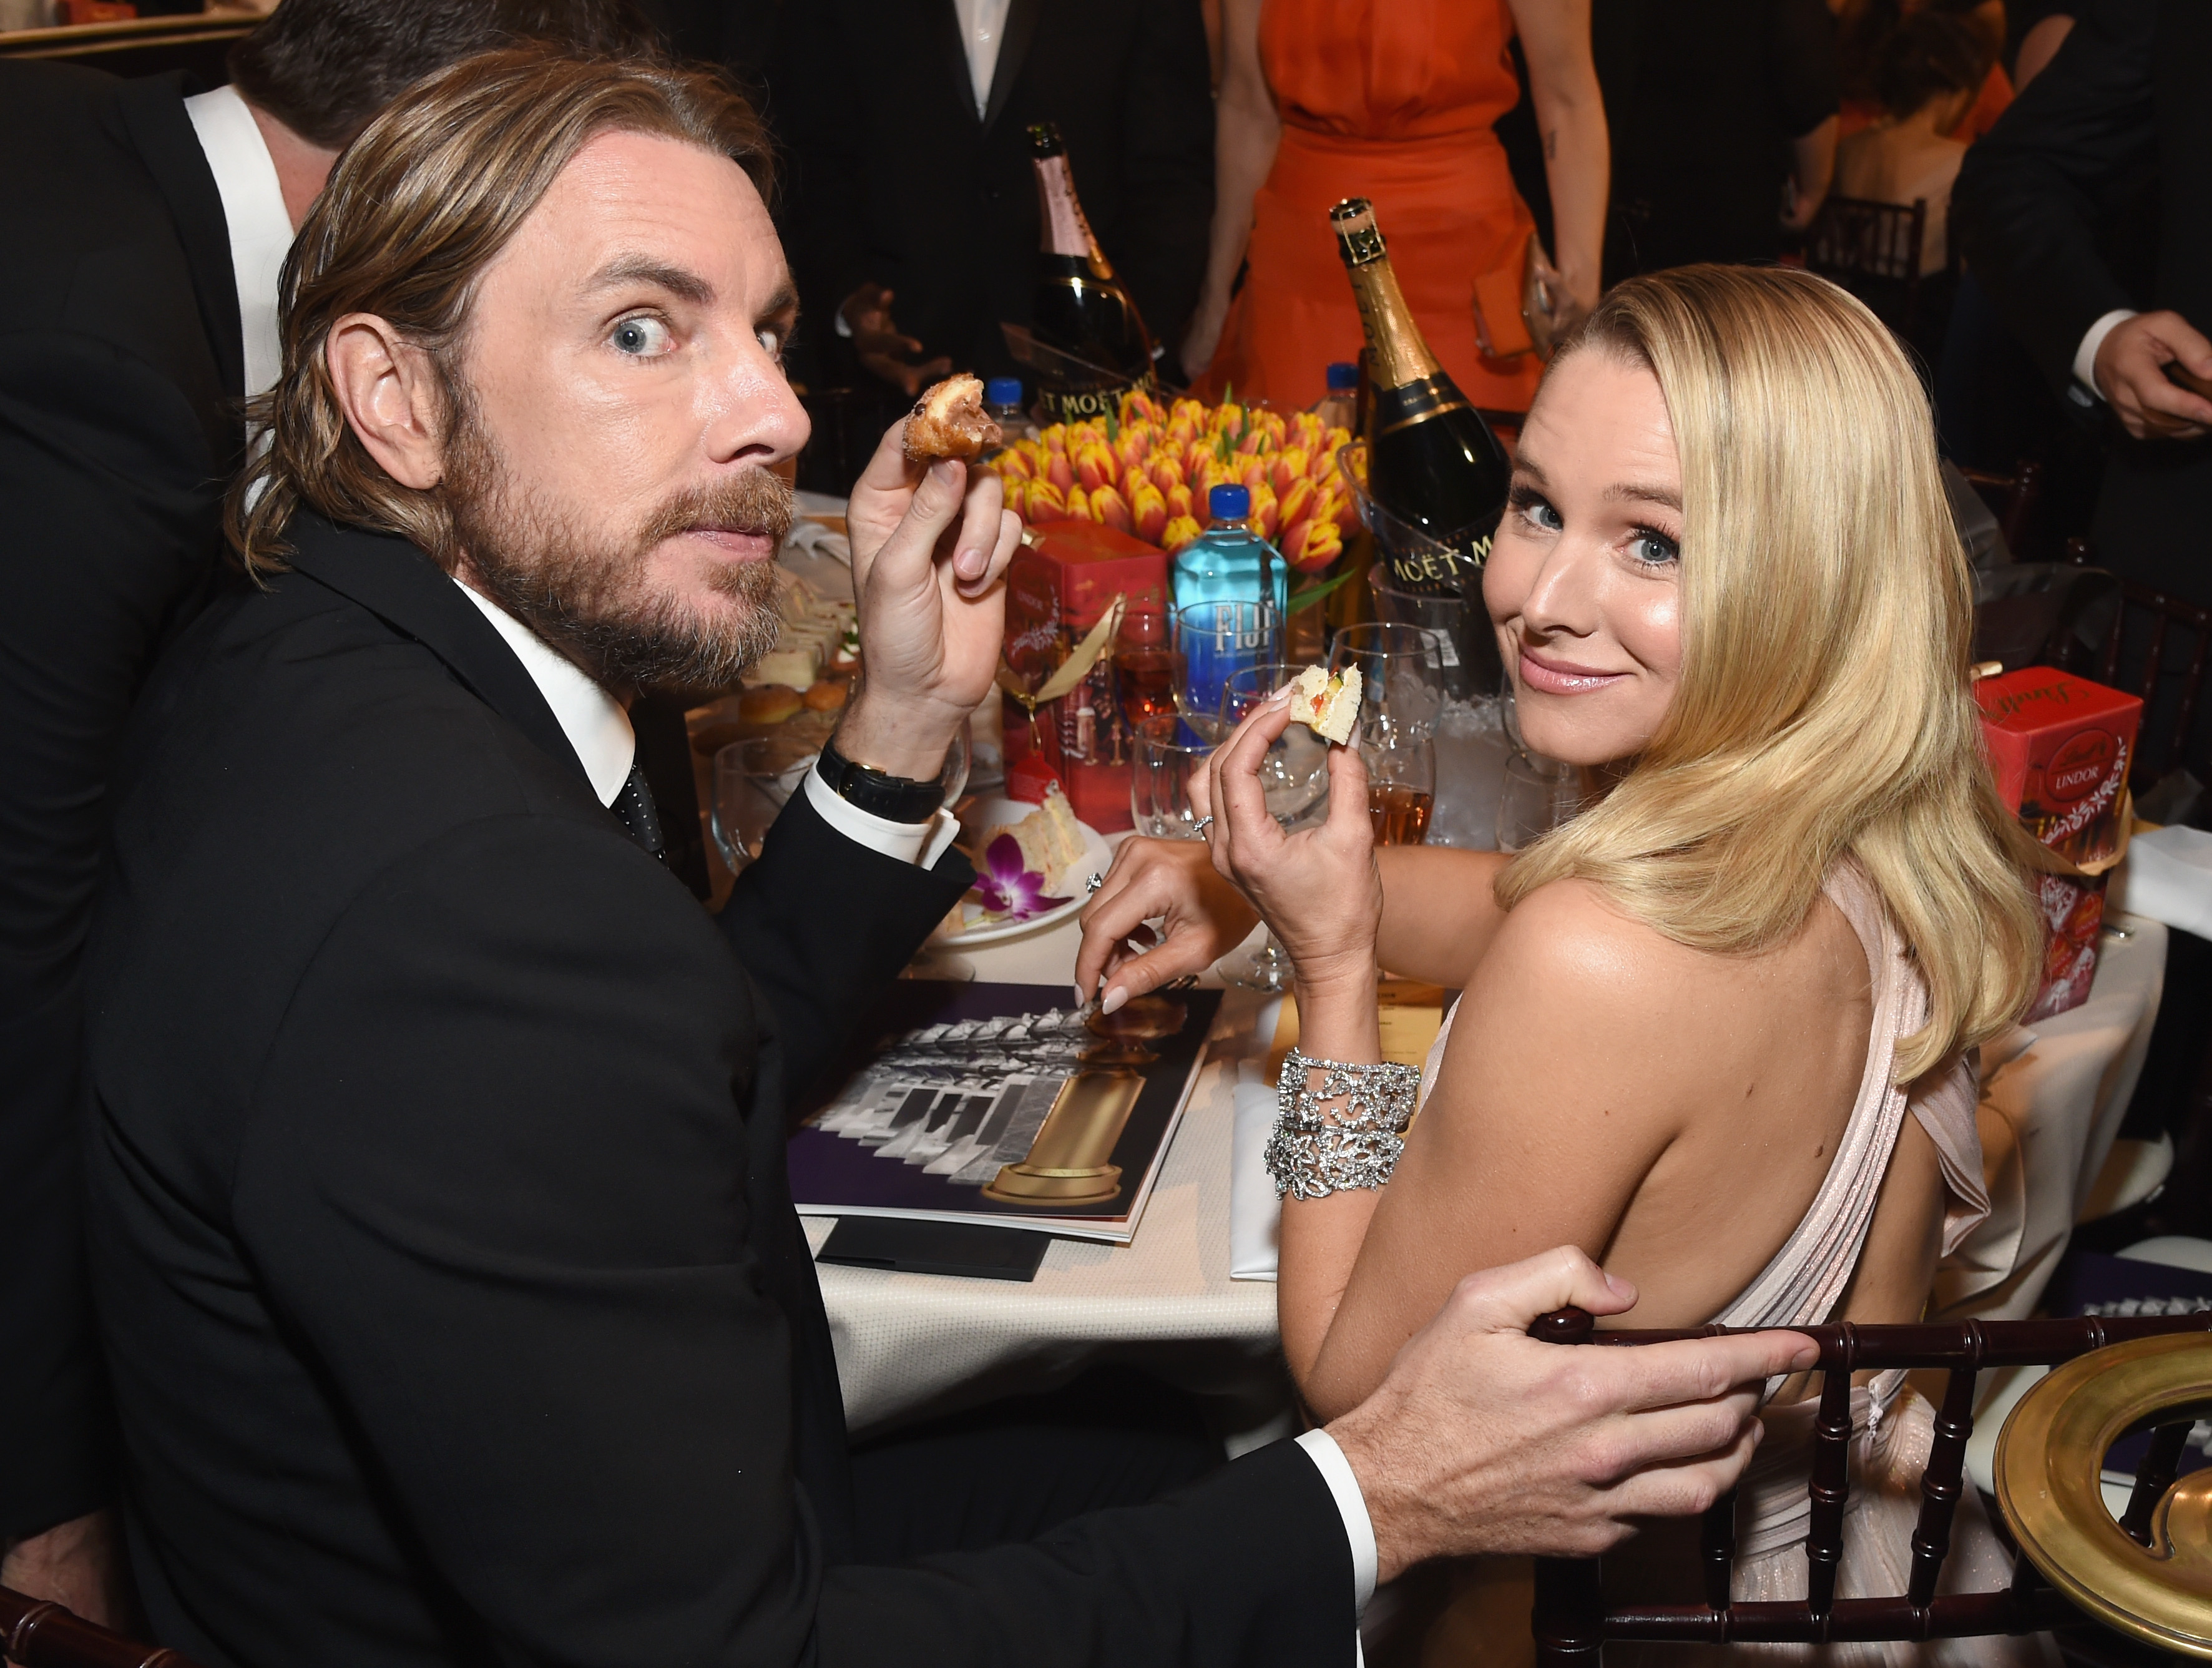 Dax and Kristen sitting at a table at an event